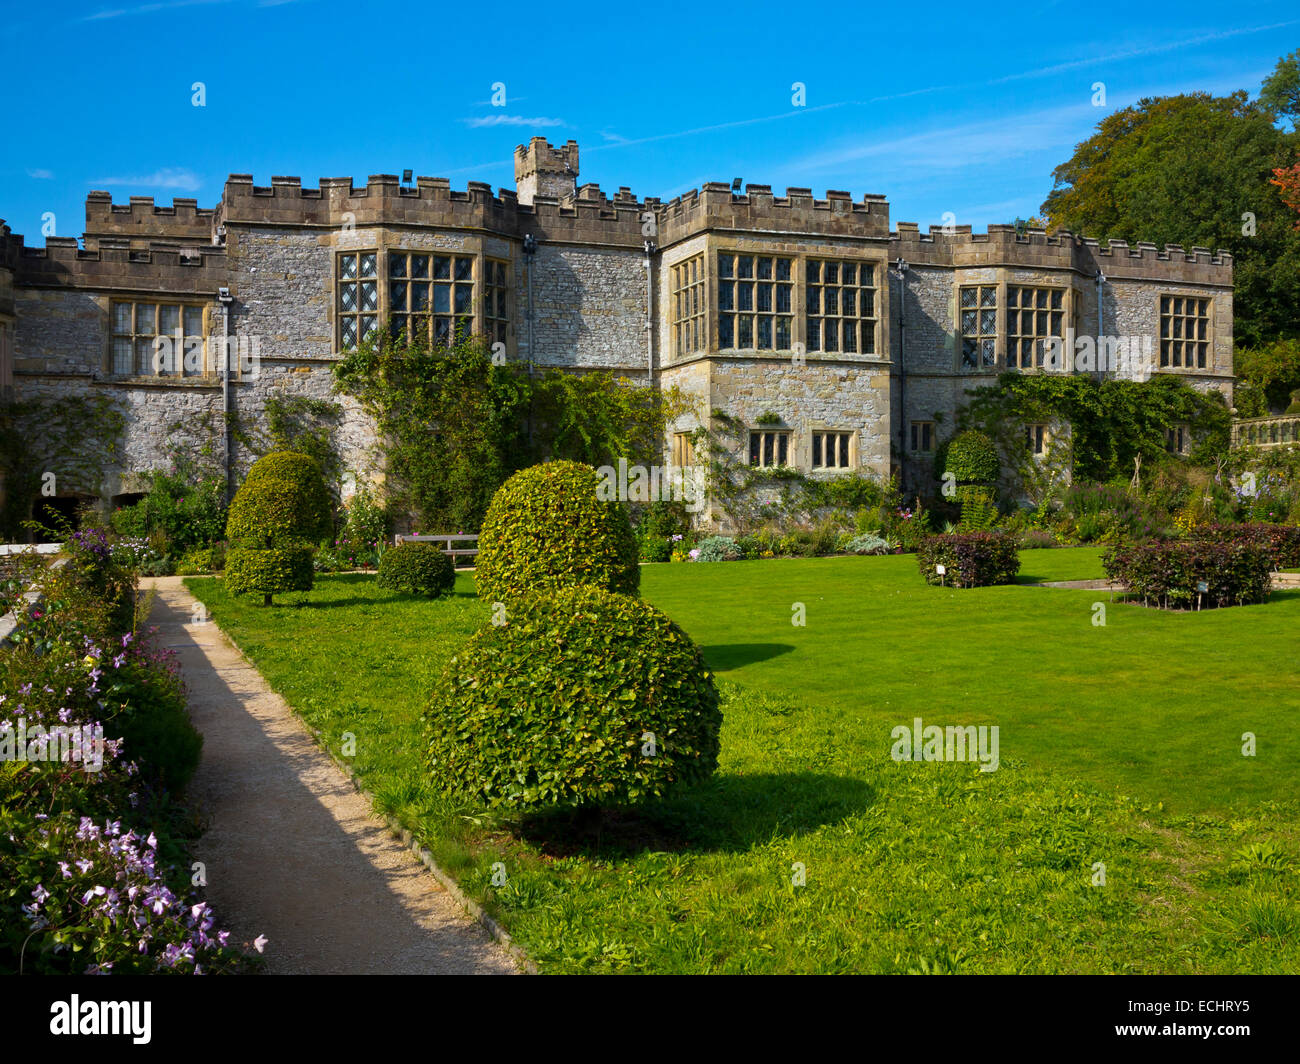 Haddon Hall near Bakewell in the Peak District Derbyshire Dales England UK a medieval house owned by the Duke of Rutland Stock Photo